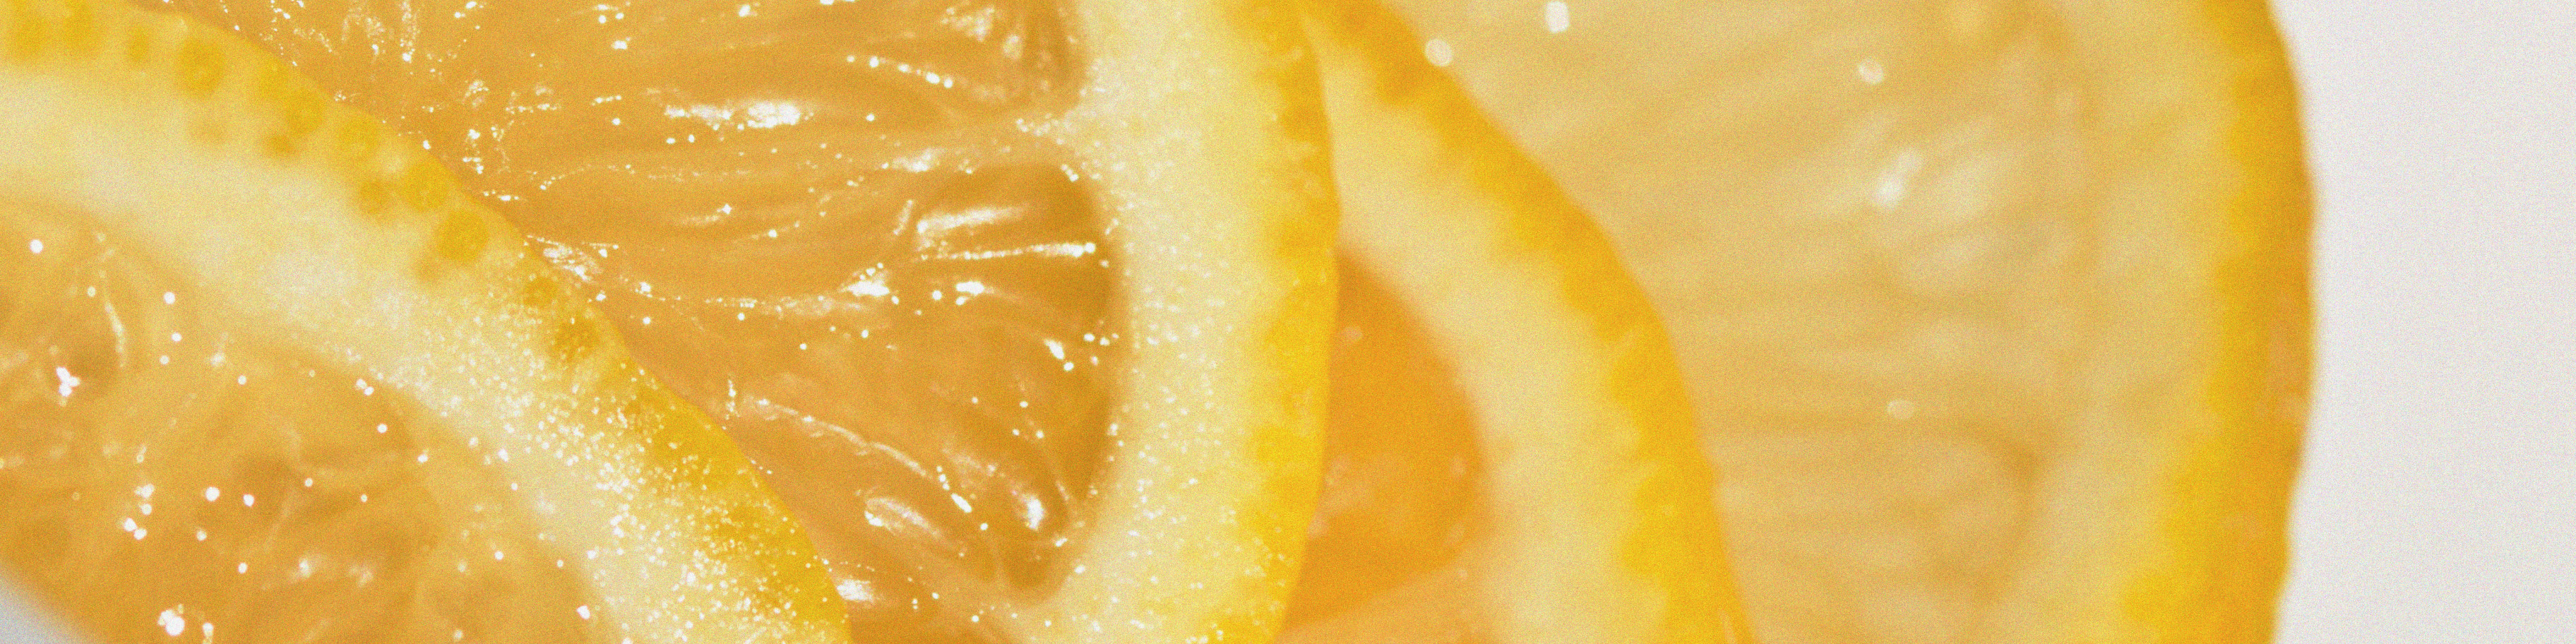 Close up of an orange as a source of folate.